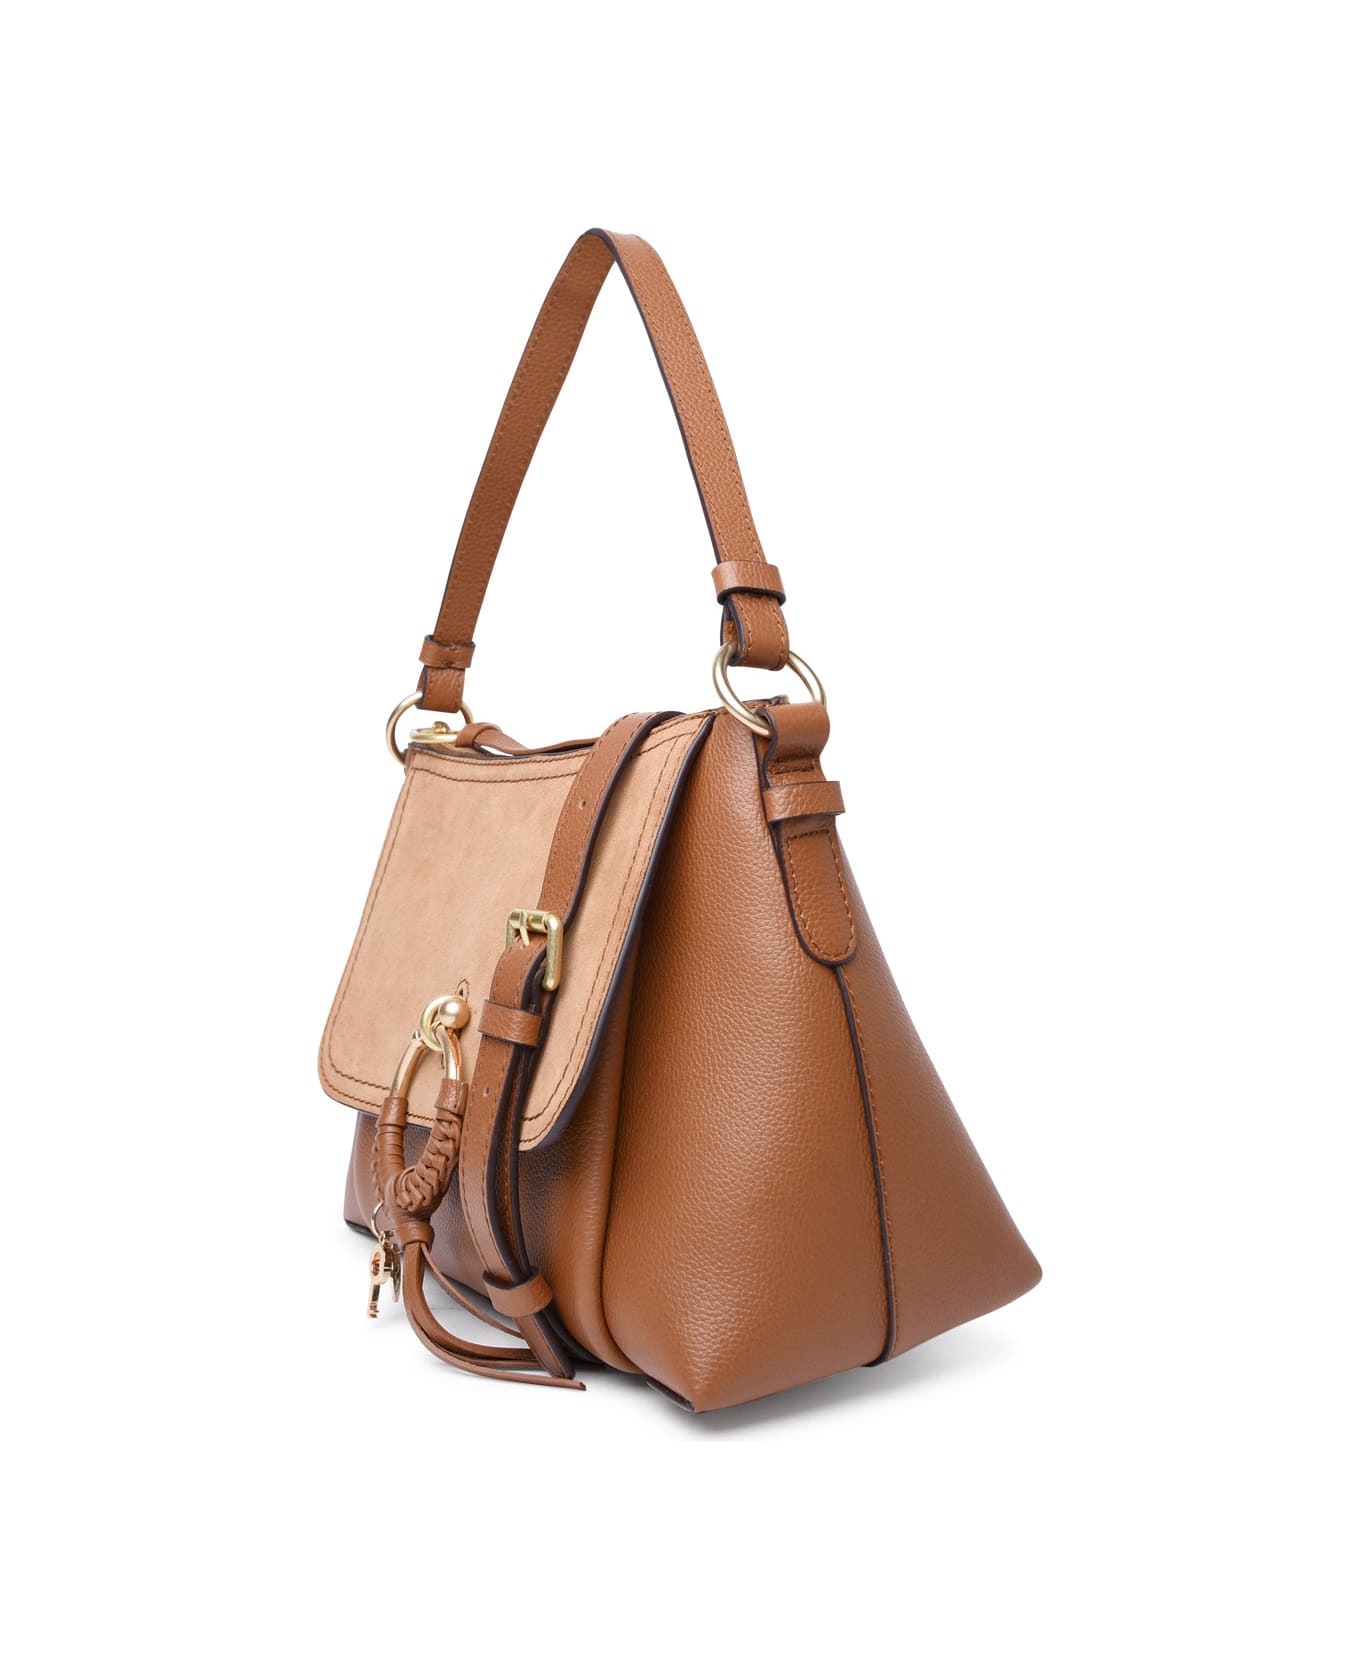 See by Chloé Small 'joan' Caramel Leather Bag - Brown